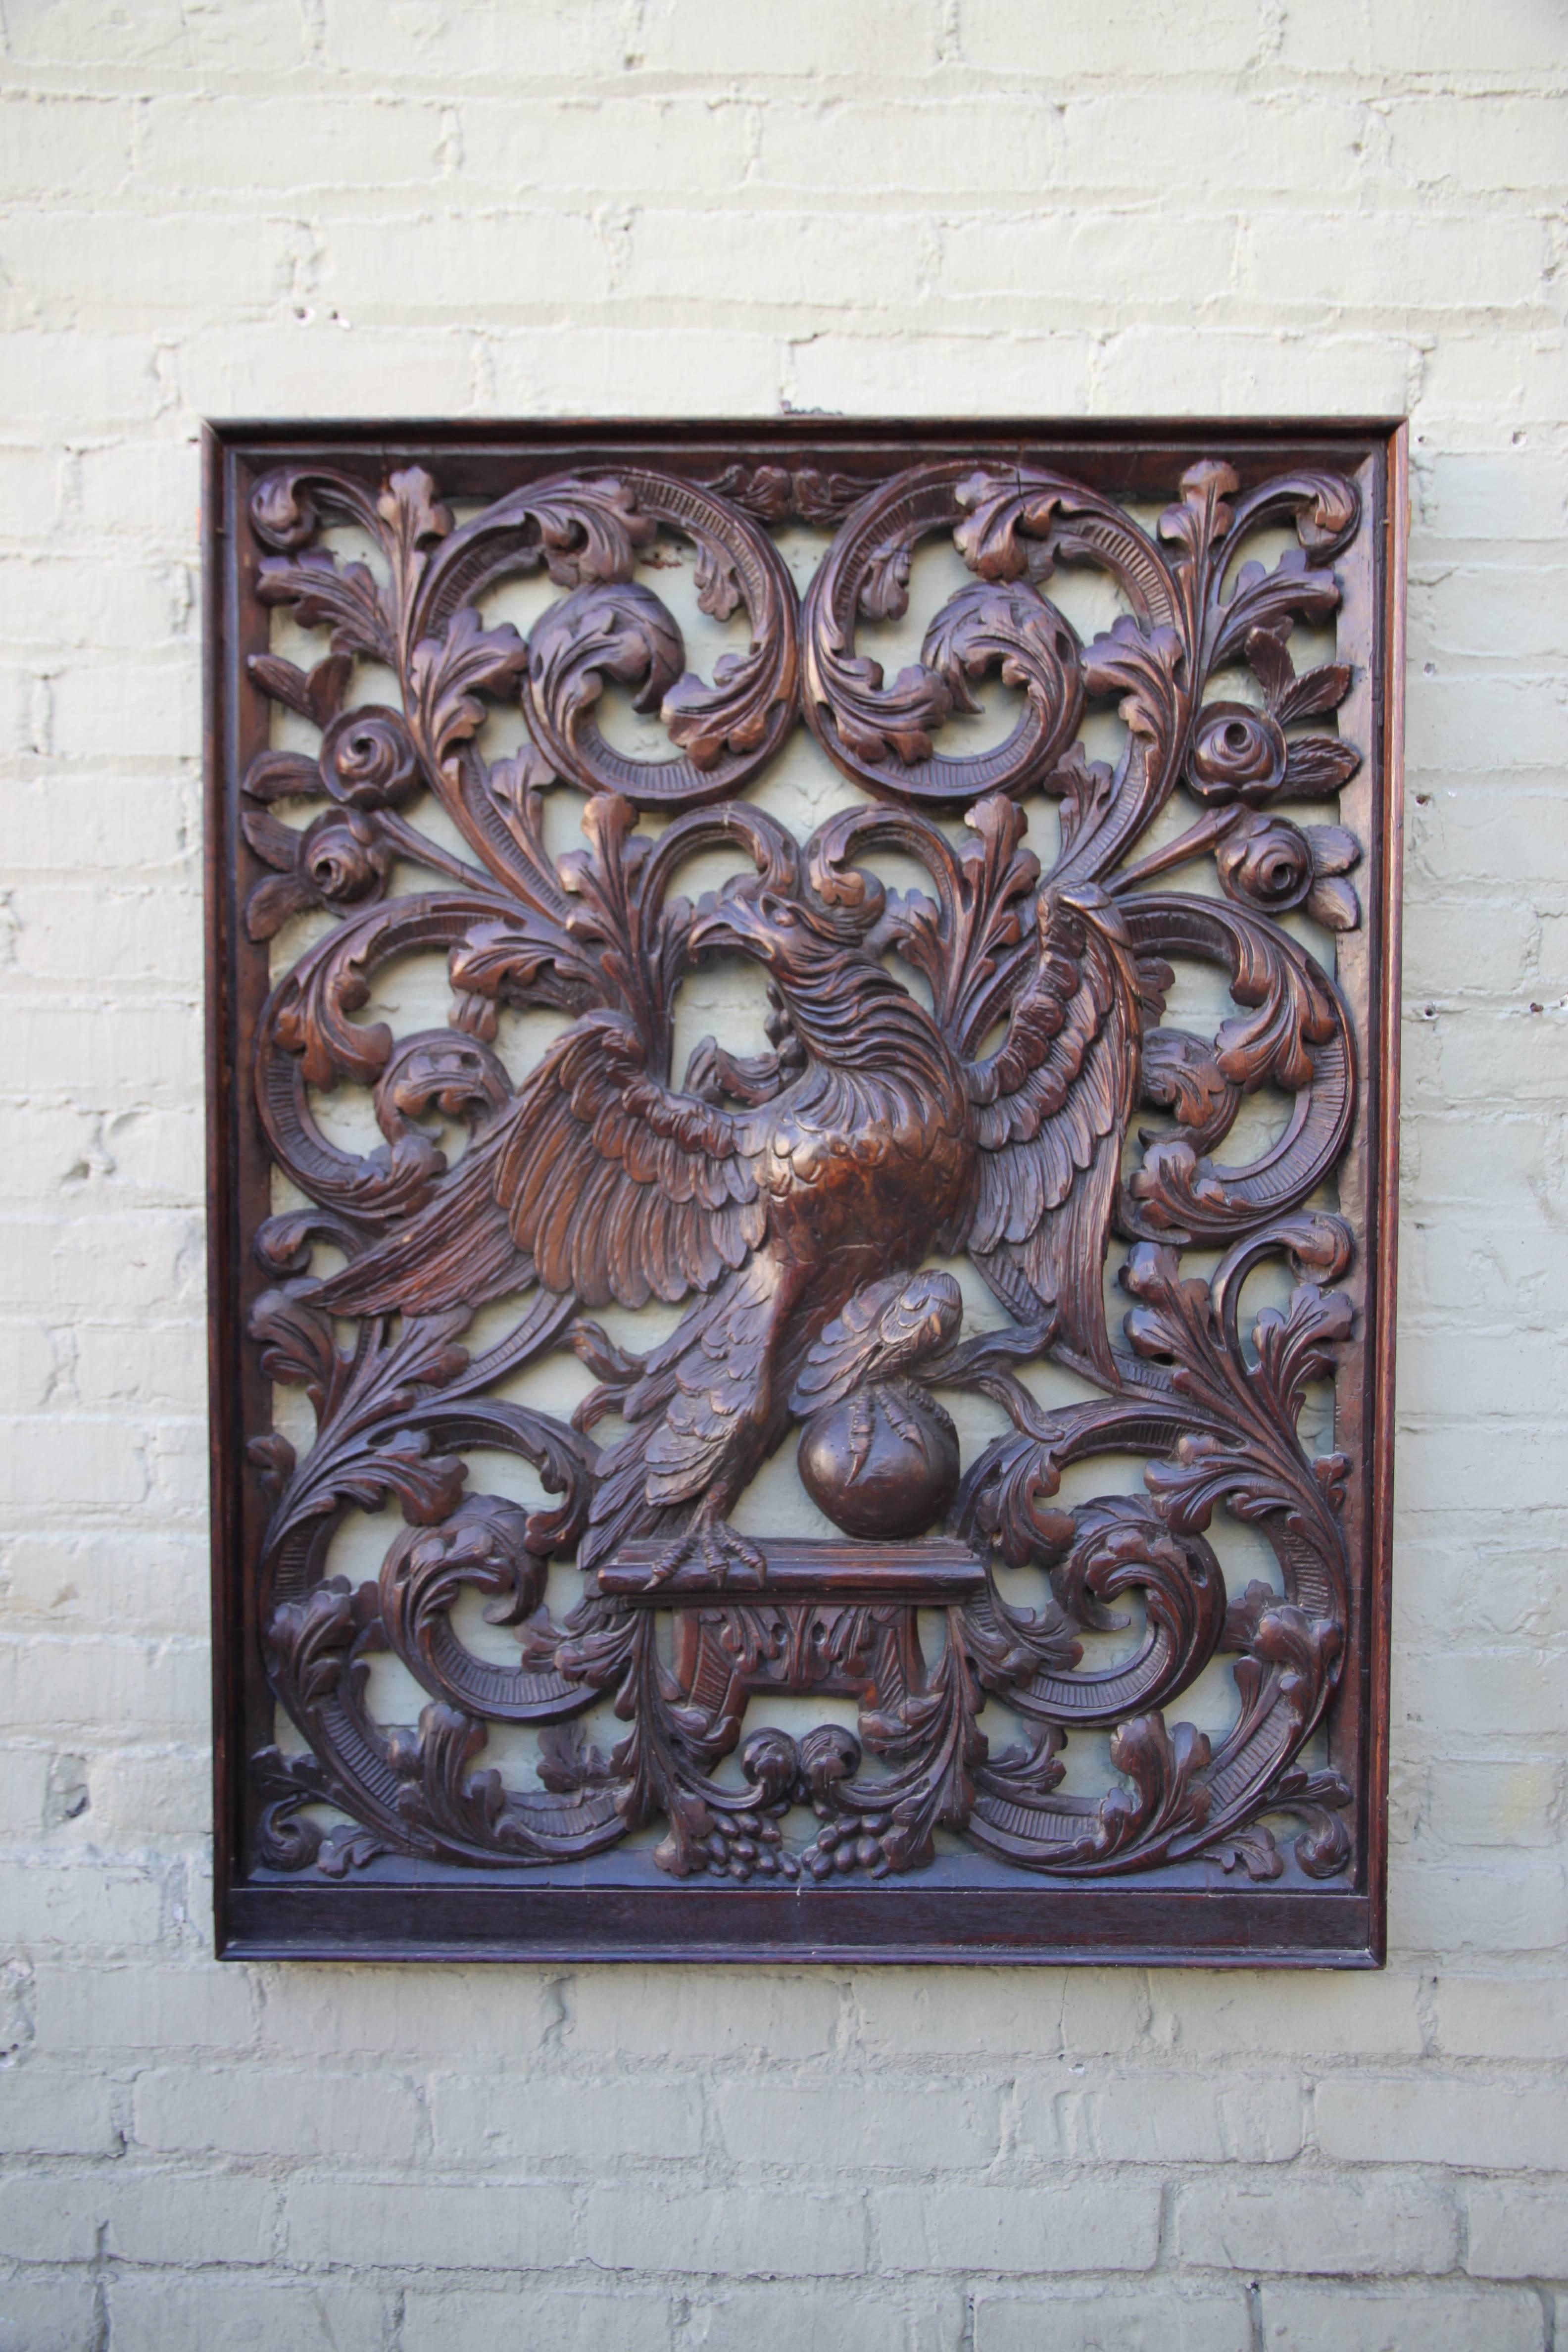 Pair of 19th century hand-carved walnut panels with Eagles and scrolled acanthus leaves throughout.